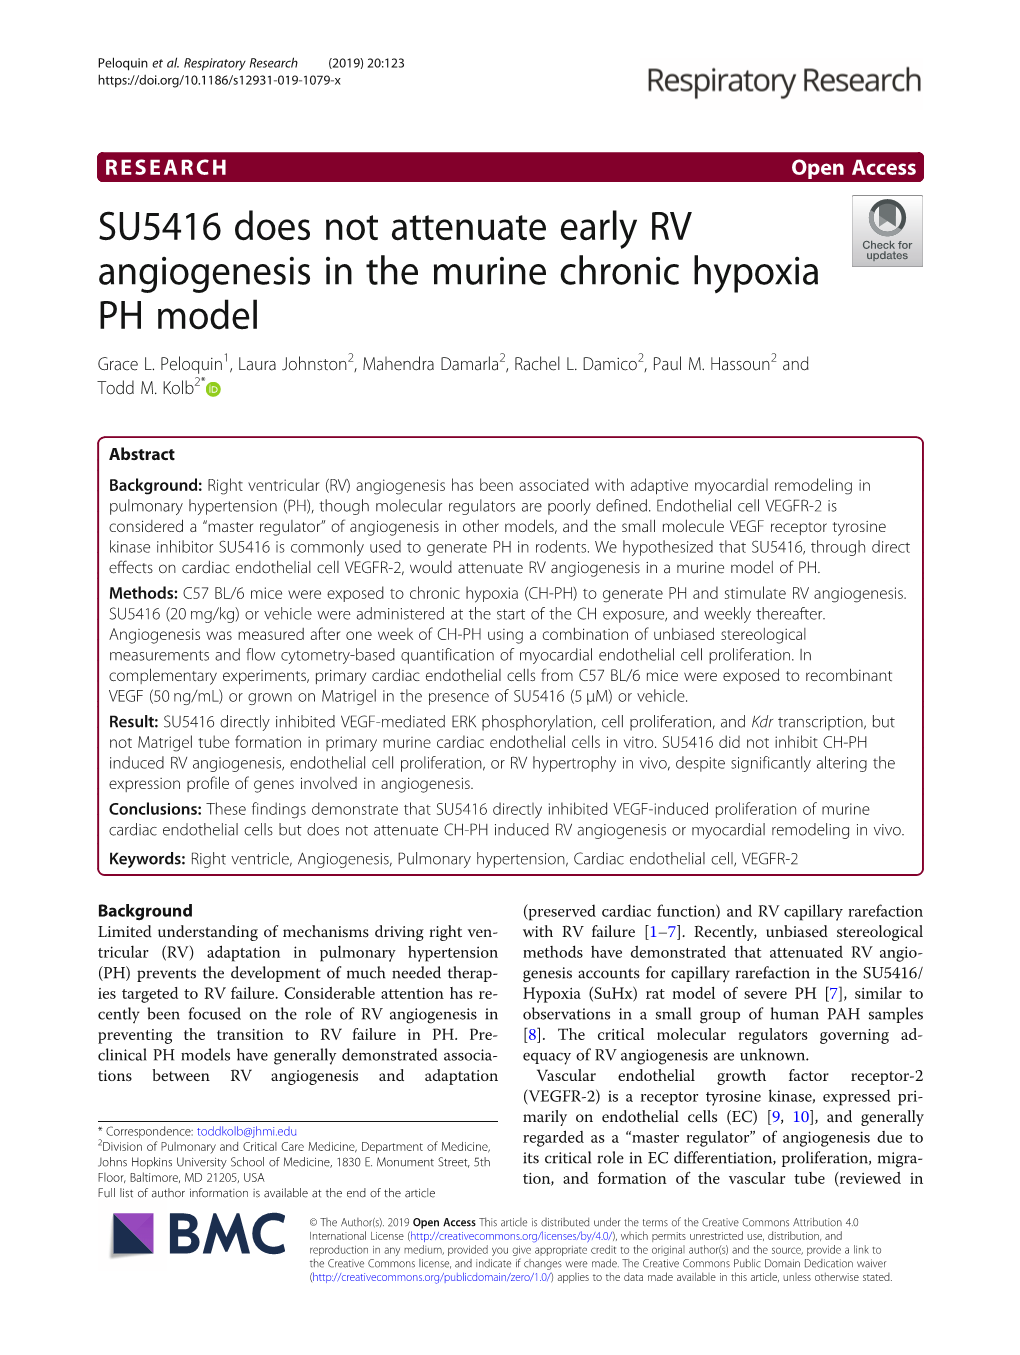 SU5416 Does Not Attenuate Early RV Angiogenesis in the Murine Chronic Hypoxia PH Model Grace L